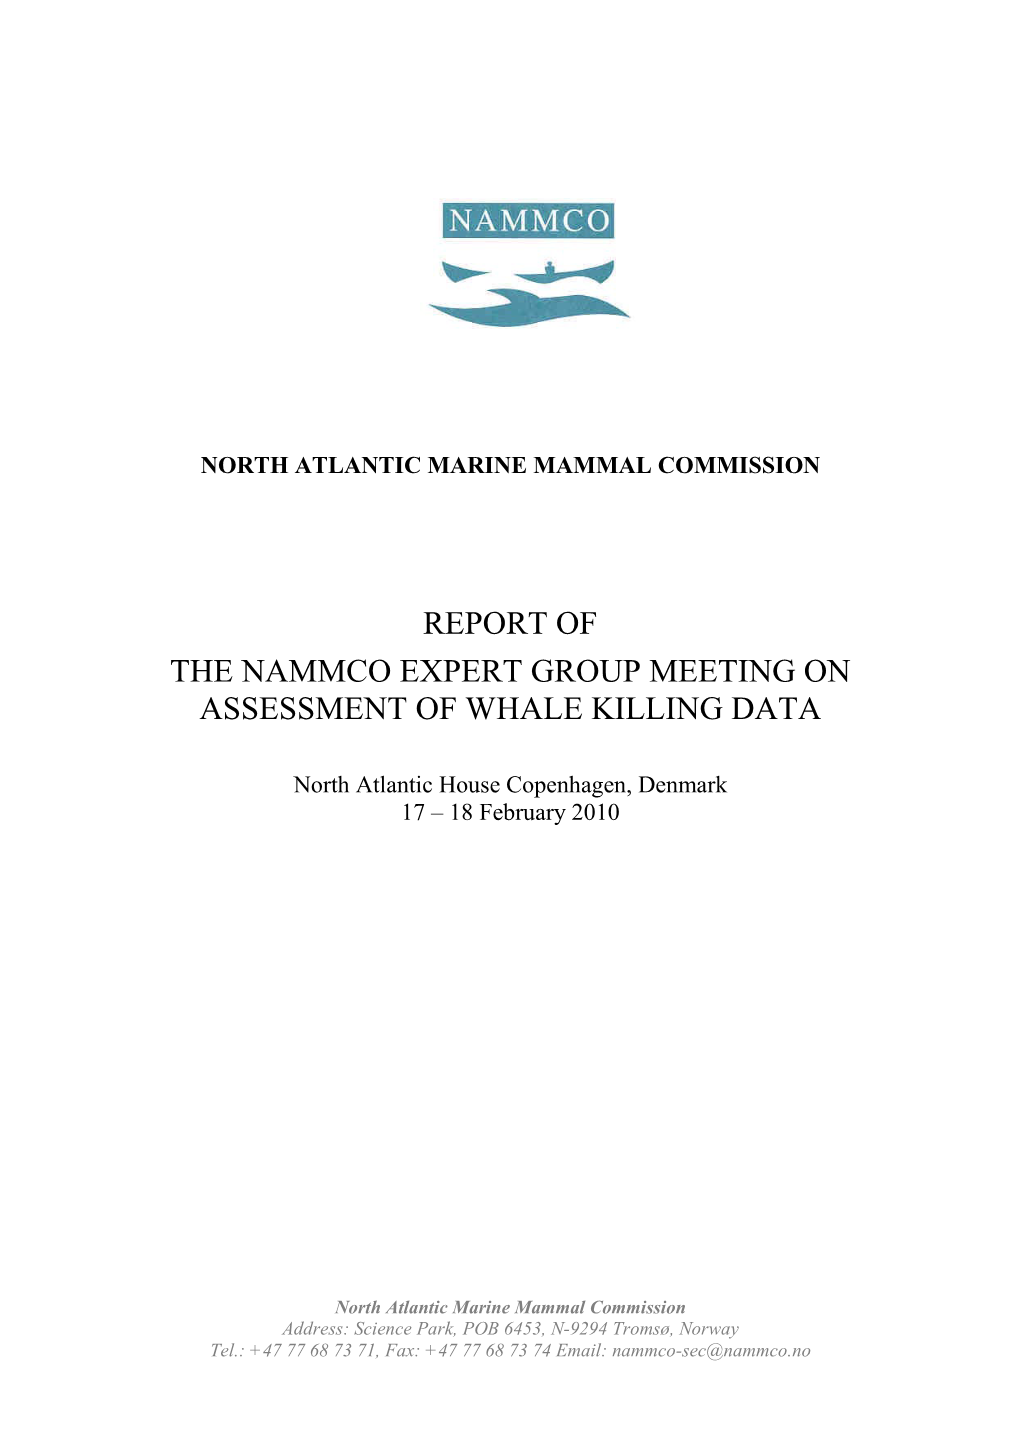 Expert Group on Assessing Whale Killing Data 28. May 2010